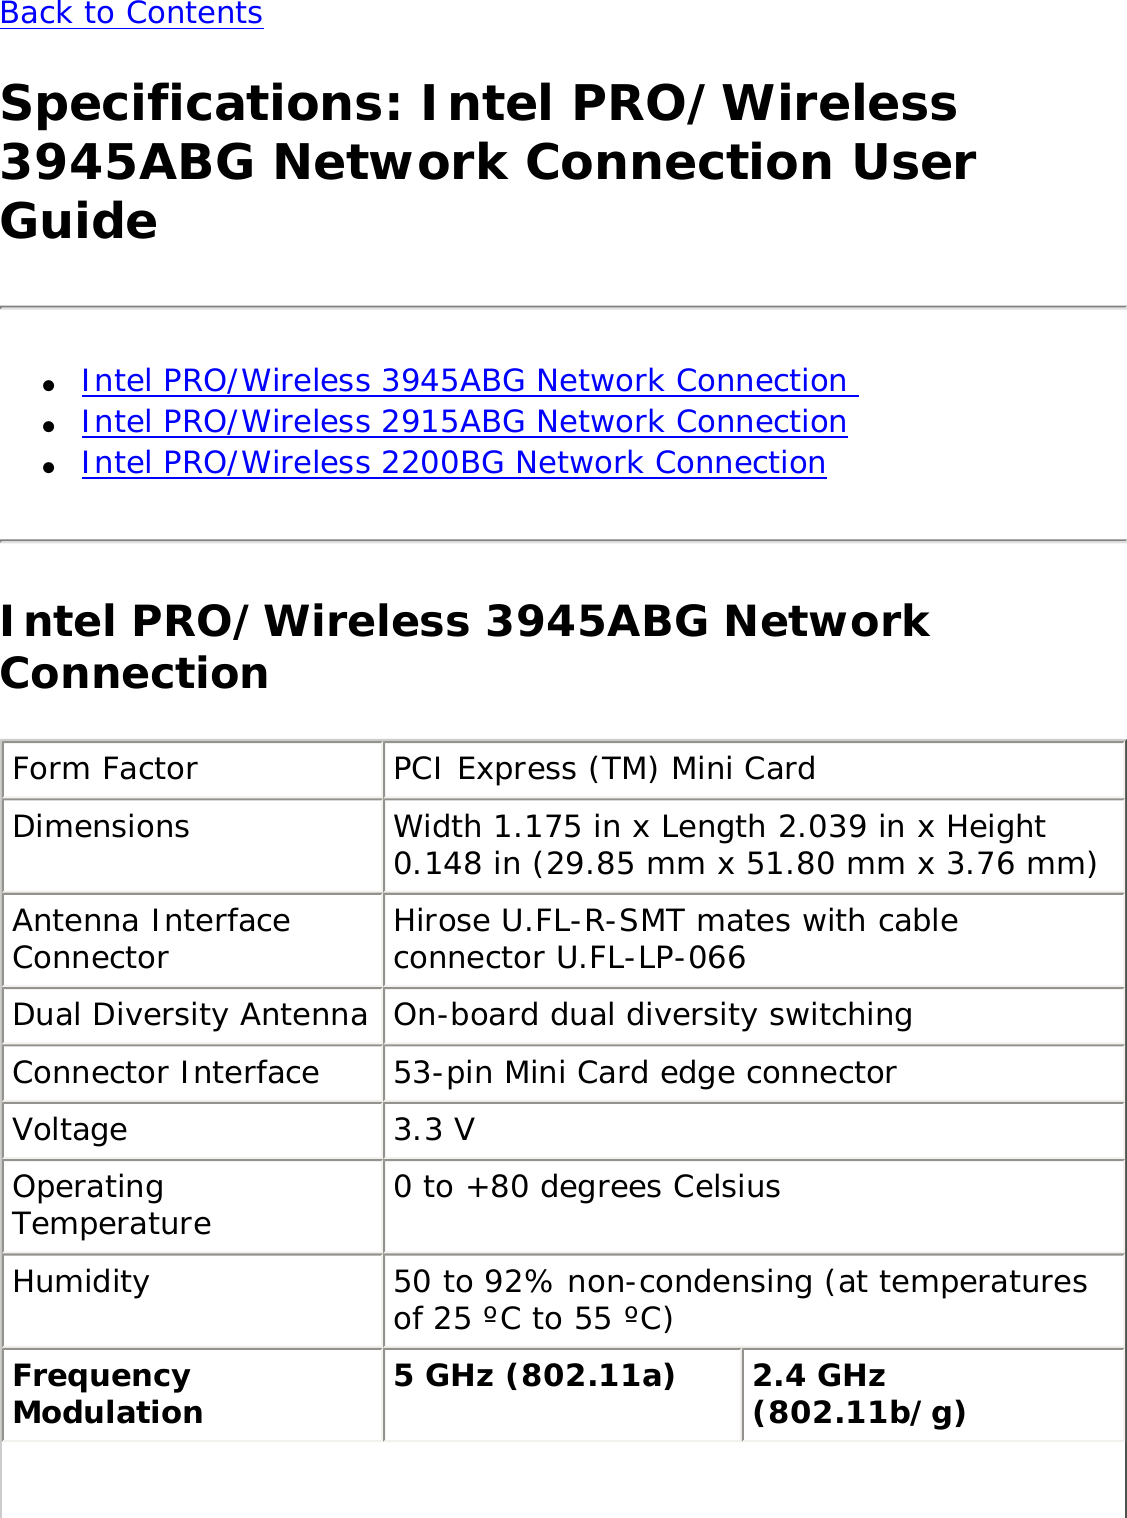 Back to Contents Specifications: Intel PRO/Wireless 3945ABG Network Connection User Guide●     Intel PRO/Wireless 3945ABG Network Connection ●     Intel PRO/Wireless 2915ABG Network Connection●     Intel PRO/Wireless 2200BG Network ConnectionIntel PRO/Wireless 3945ABG Network ConnectionForm Factor PCI Express (TM) Mini Card Dimensions Width 1.175 in x Length 2.039 in x Height 0.148 in (29.85 mm x 51.80 mm x 3.76 mm) Antenna Interface Connector Hirose U.FL-R-SMT mates with cable connector U.FL-LP-066 Dual Diversity Antenna On-board dual diversity switching Connector Interface 53-pin Mini Card edge connector Voltage 3.3 V Operating Temperature 0 to +80 degrees Celsius Humidity 50 to 92% non-condensing (at temperatures of 25 ºC to 55 ºC) Frequency Modulation 5 GHz (802.11a) 2.4 GHz (802.11b/g) 